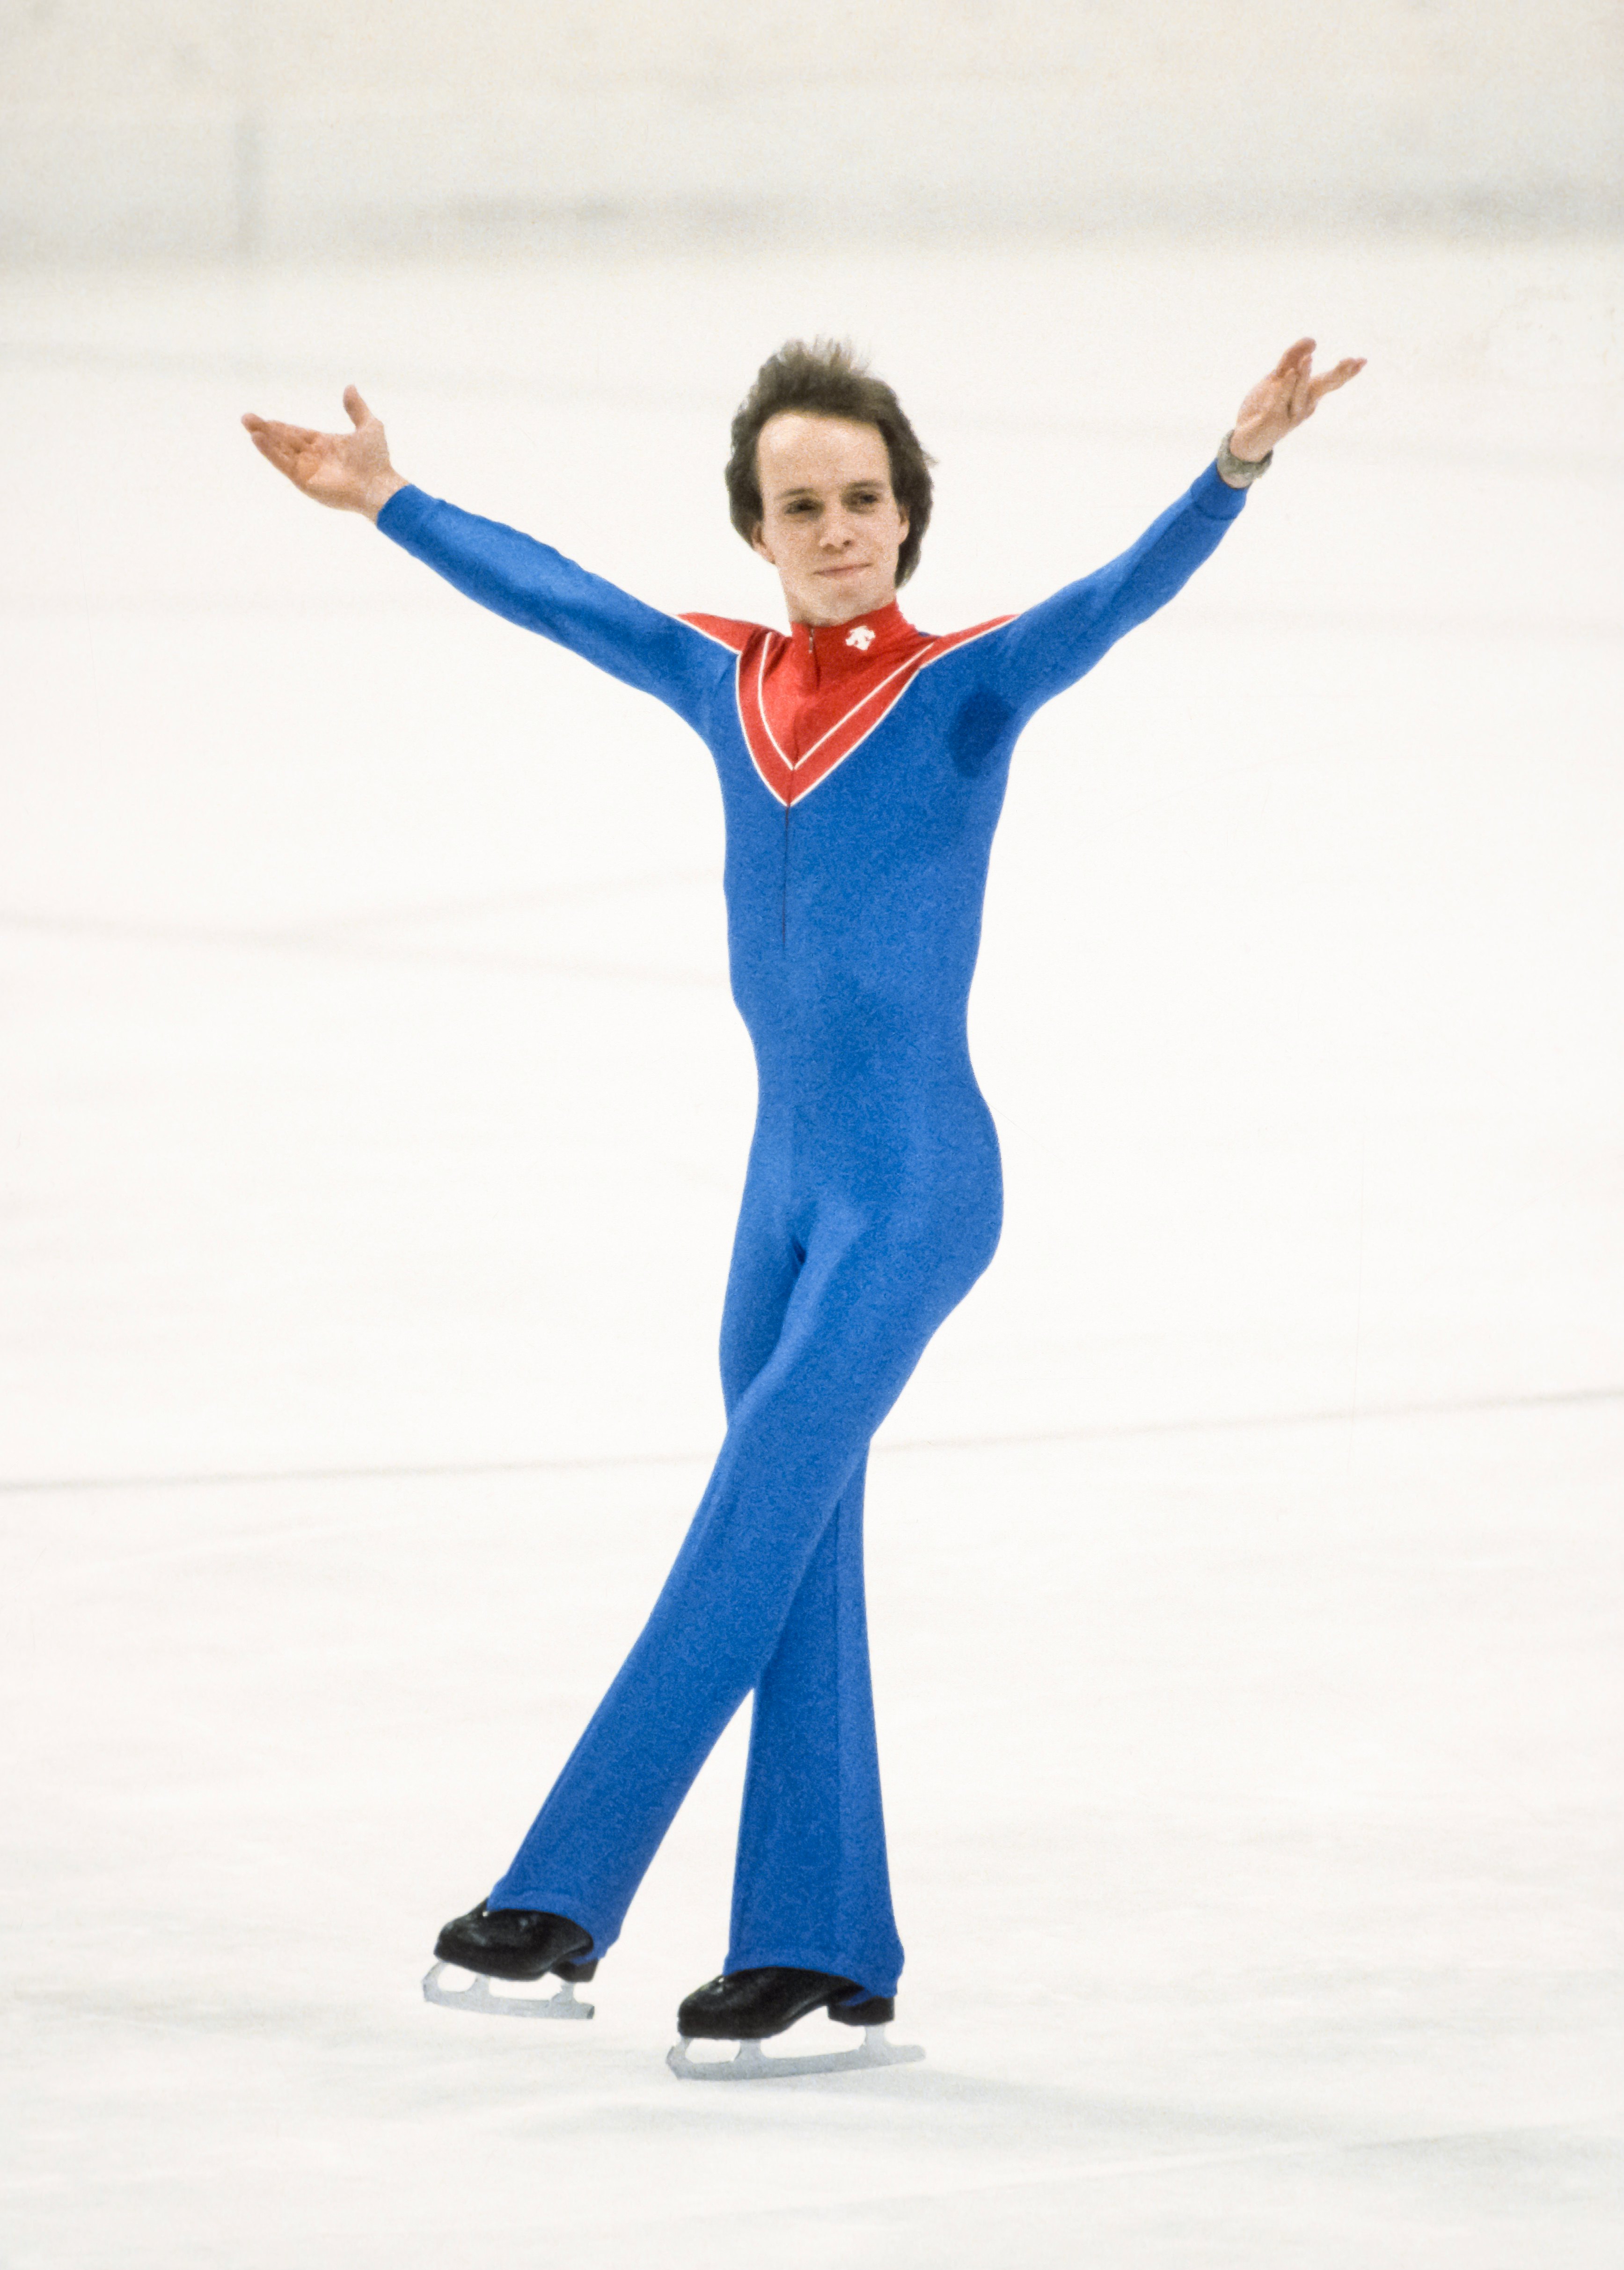 See how Olympic figure skating costumes have changed through the years